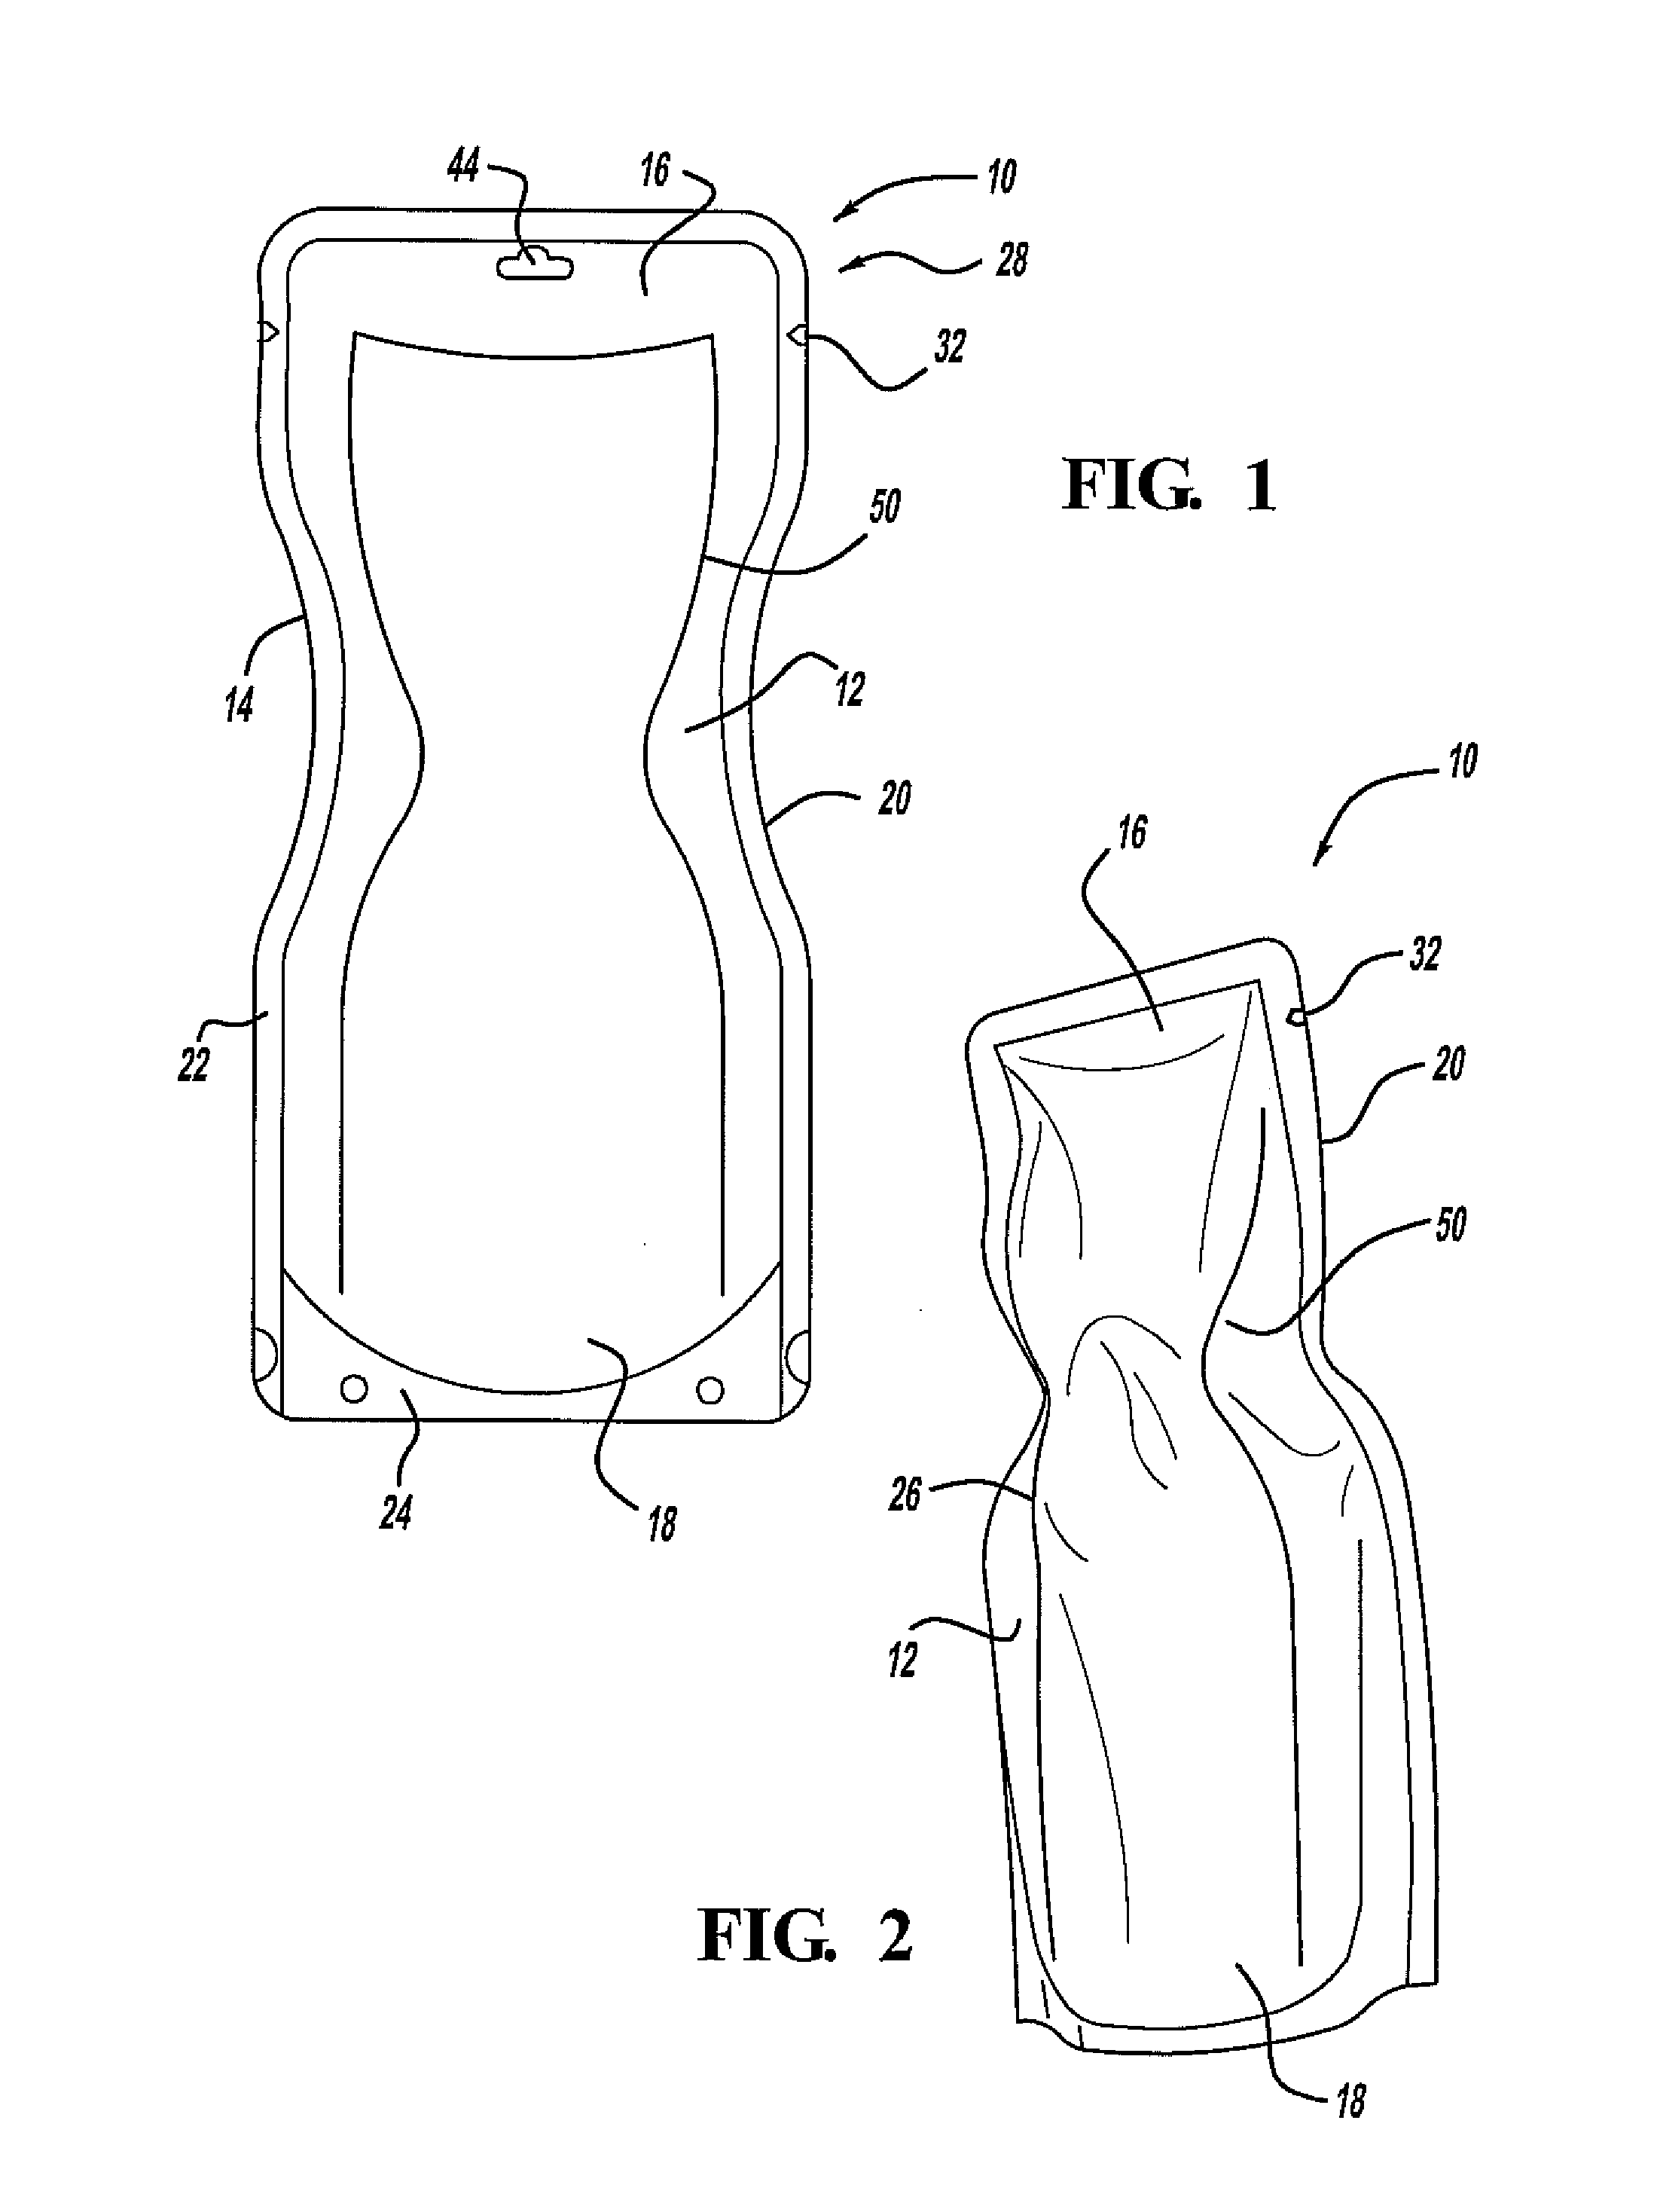 Stand-up flexible pouch and method of forming